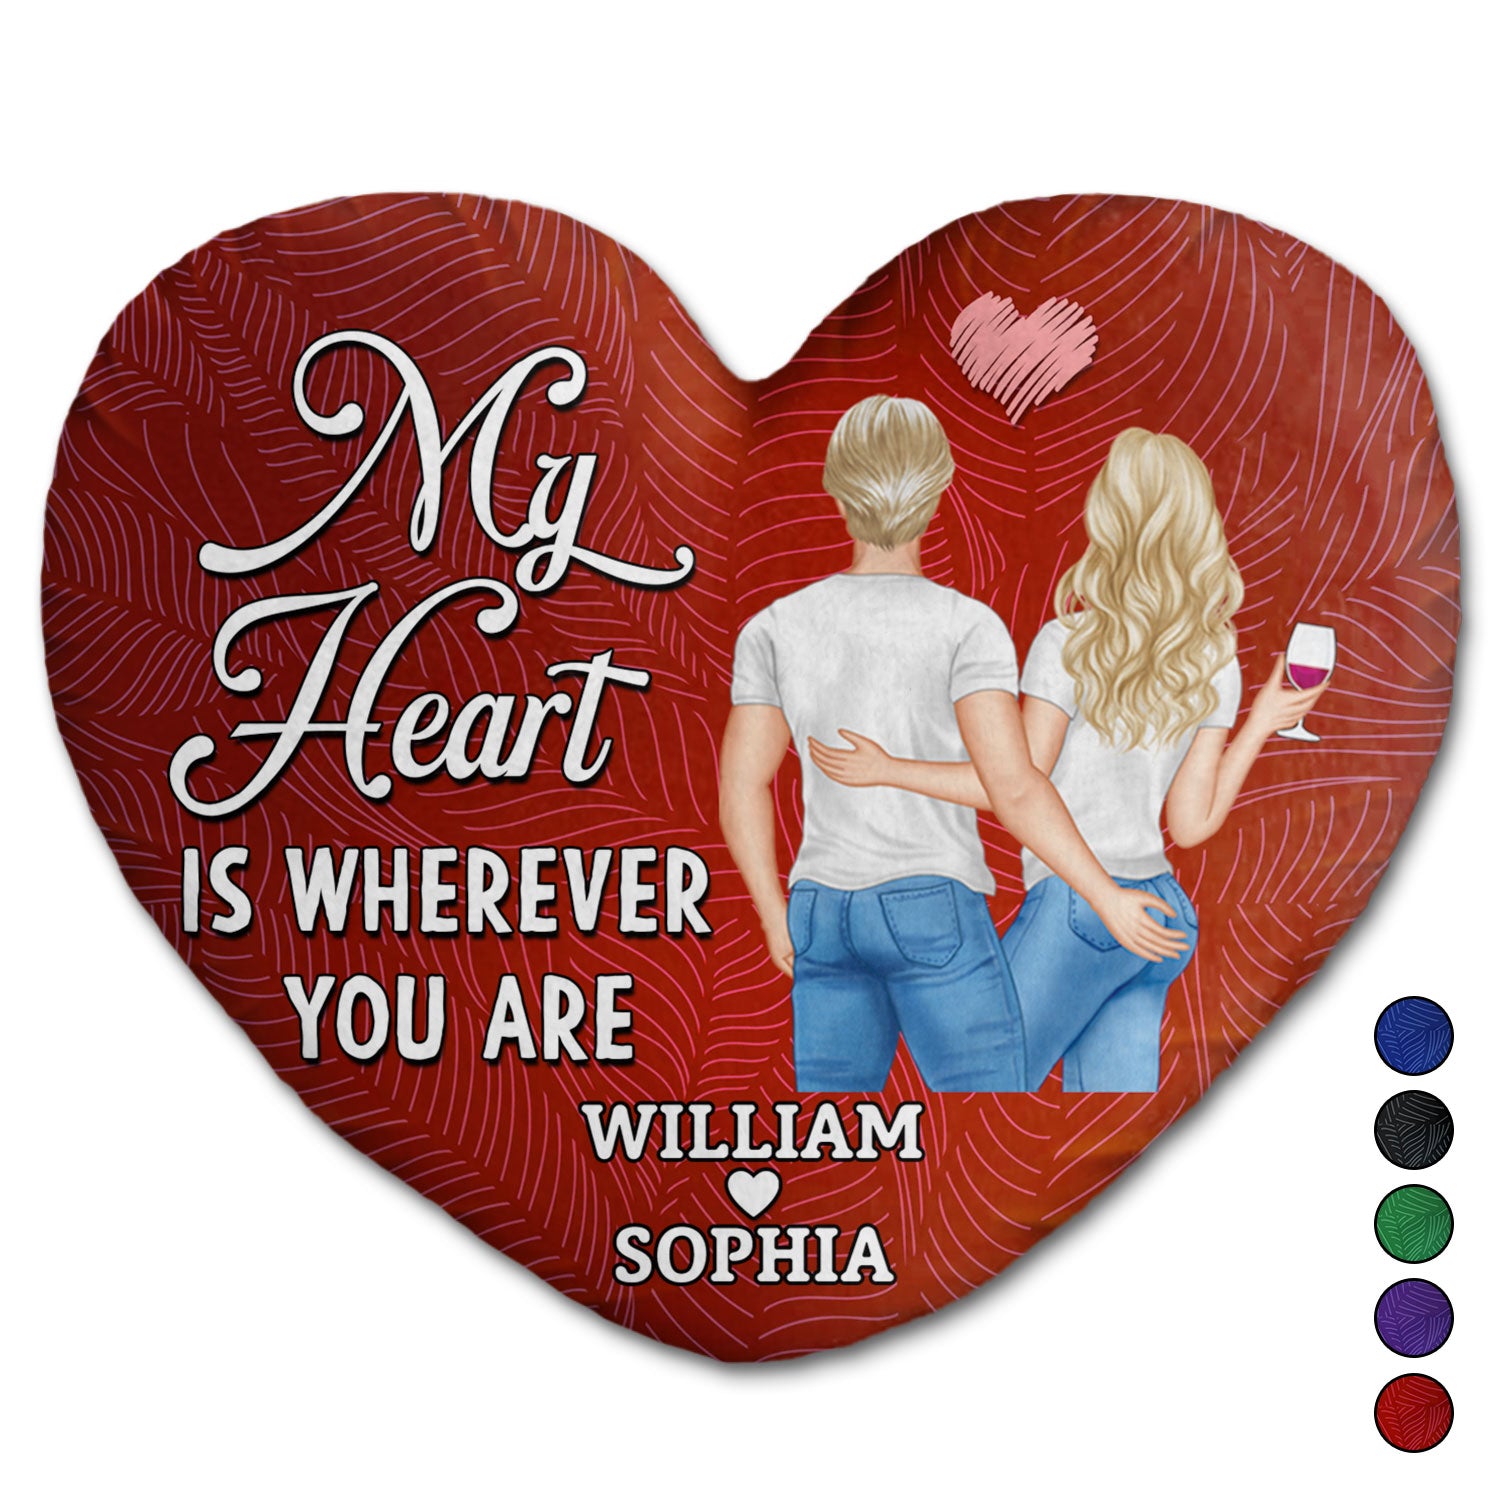 My Heart Is Wherever You Are - Anniversary, Loving Gift For Couples, Husband, Wife - Personalized Heart Shaped Pillow